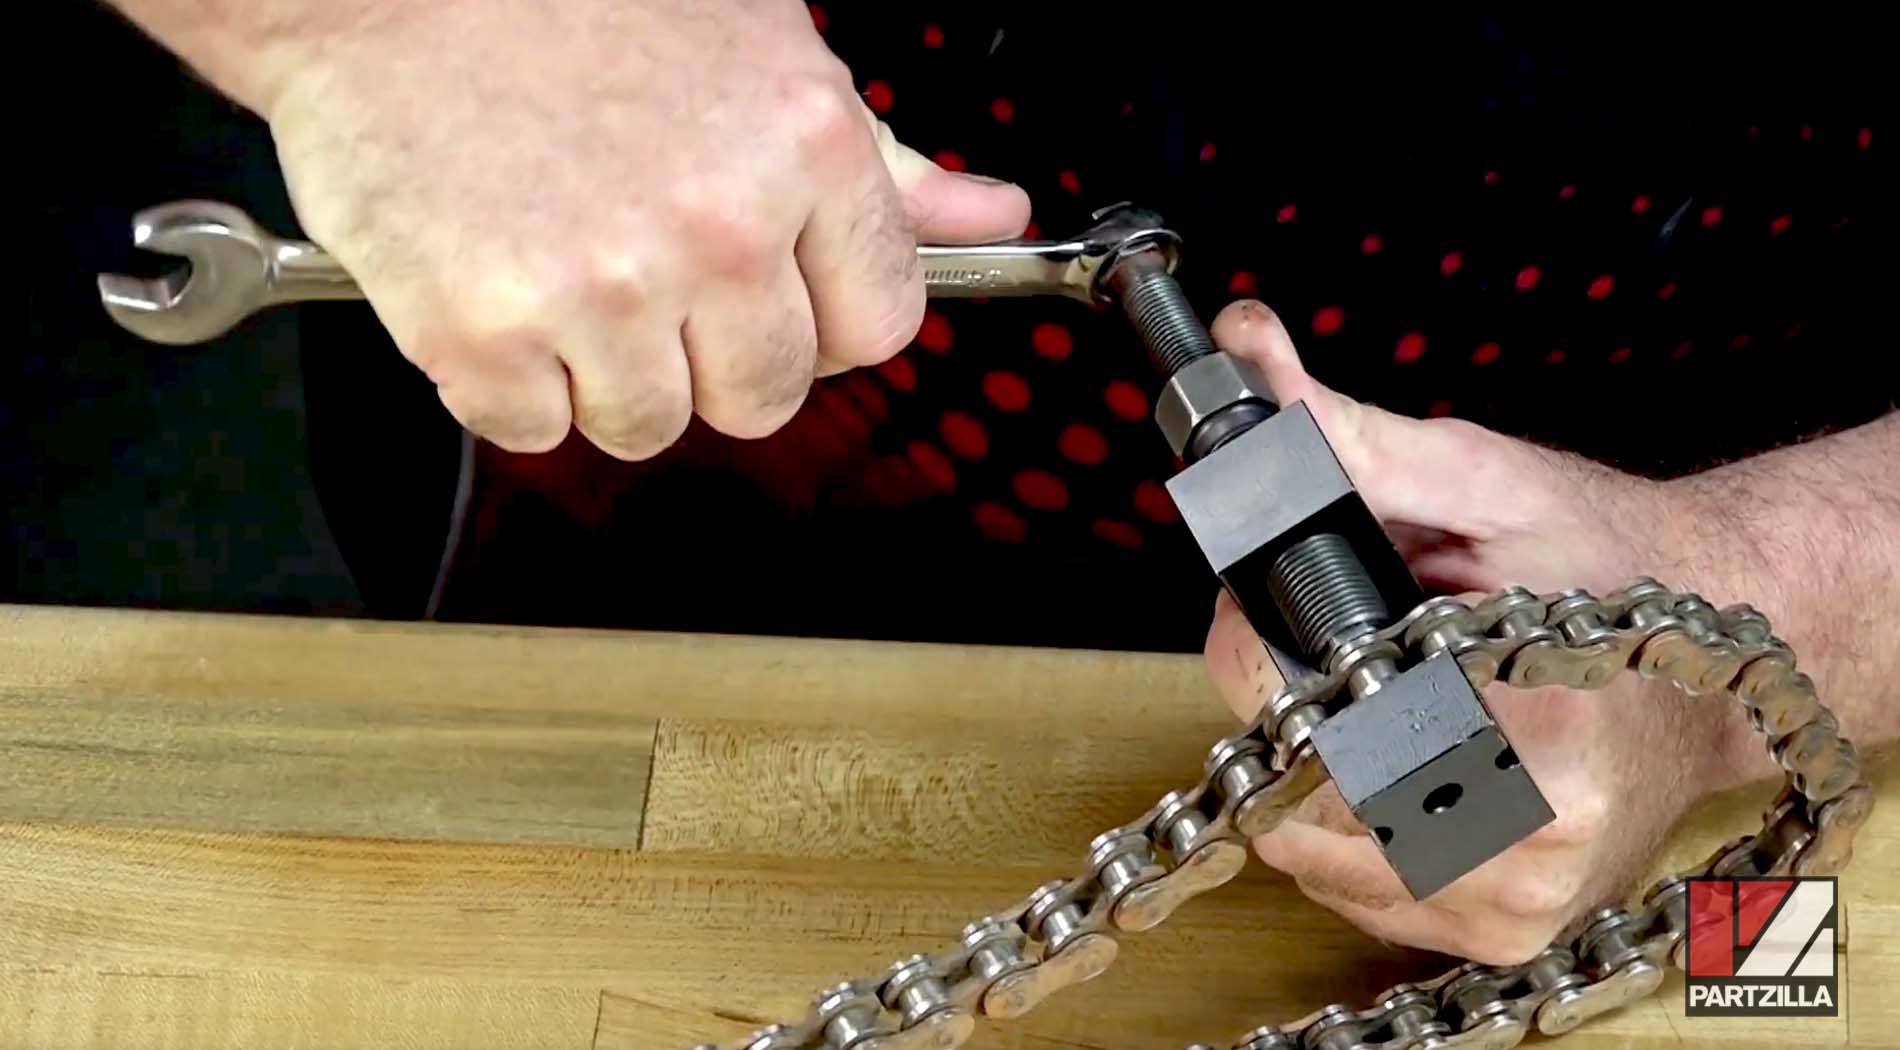 How to use a motorcycle chain tool